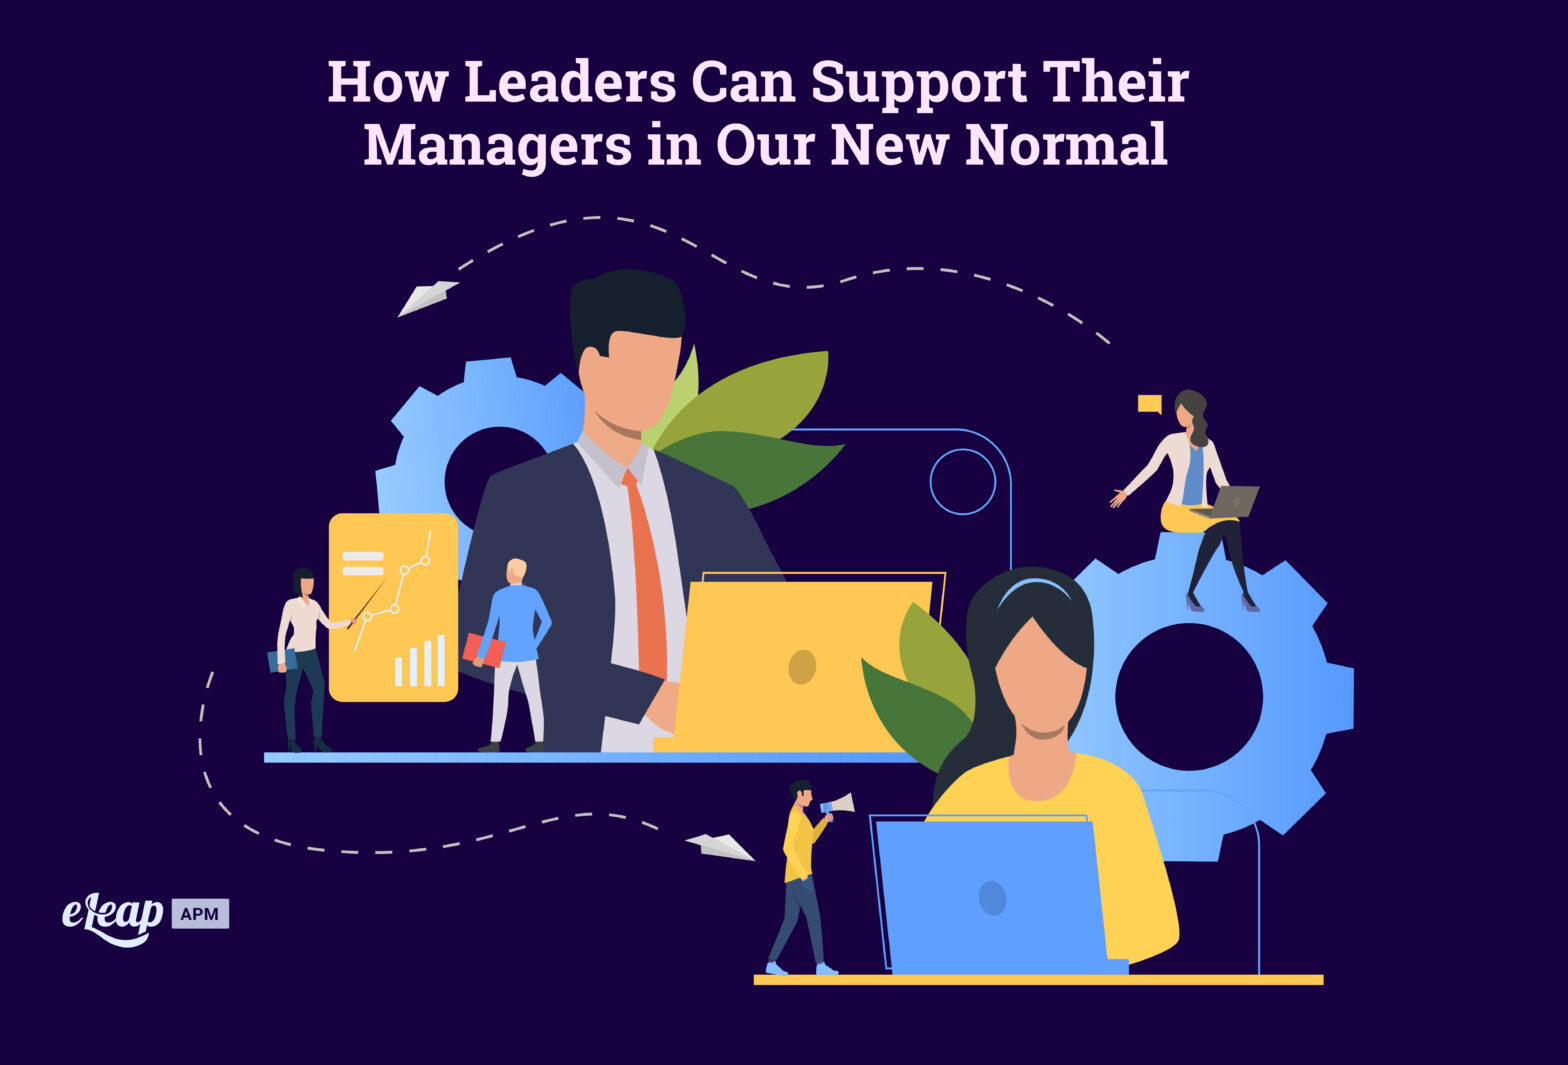 How Leaders Can Support Their Managers in Our New Normal